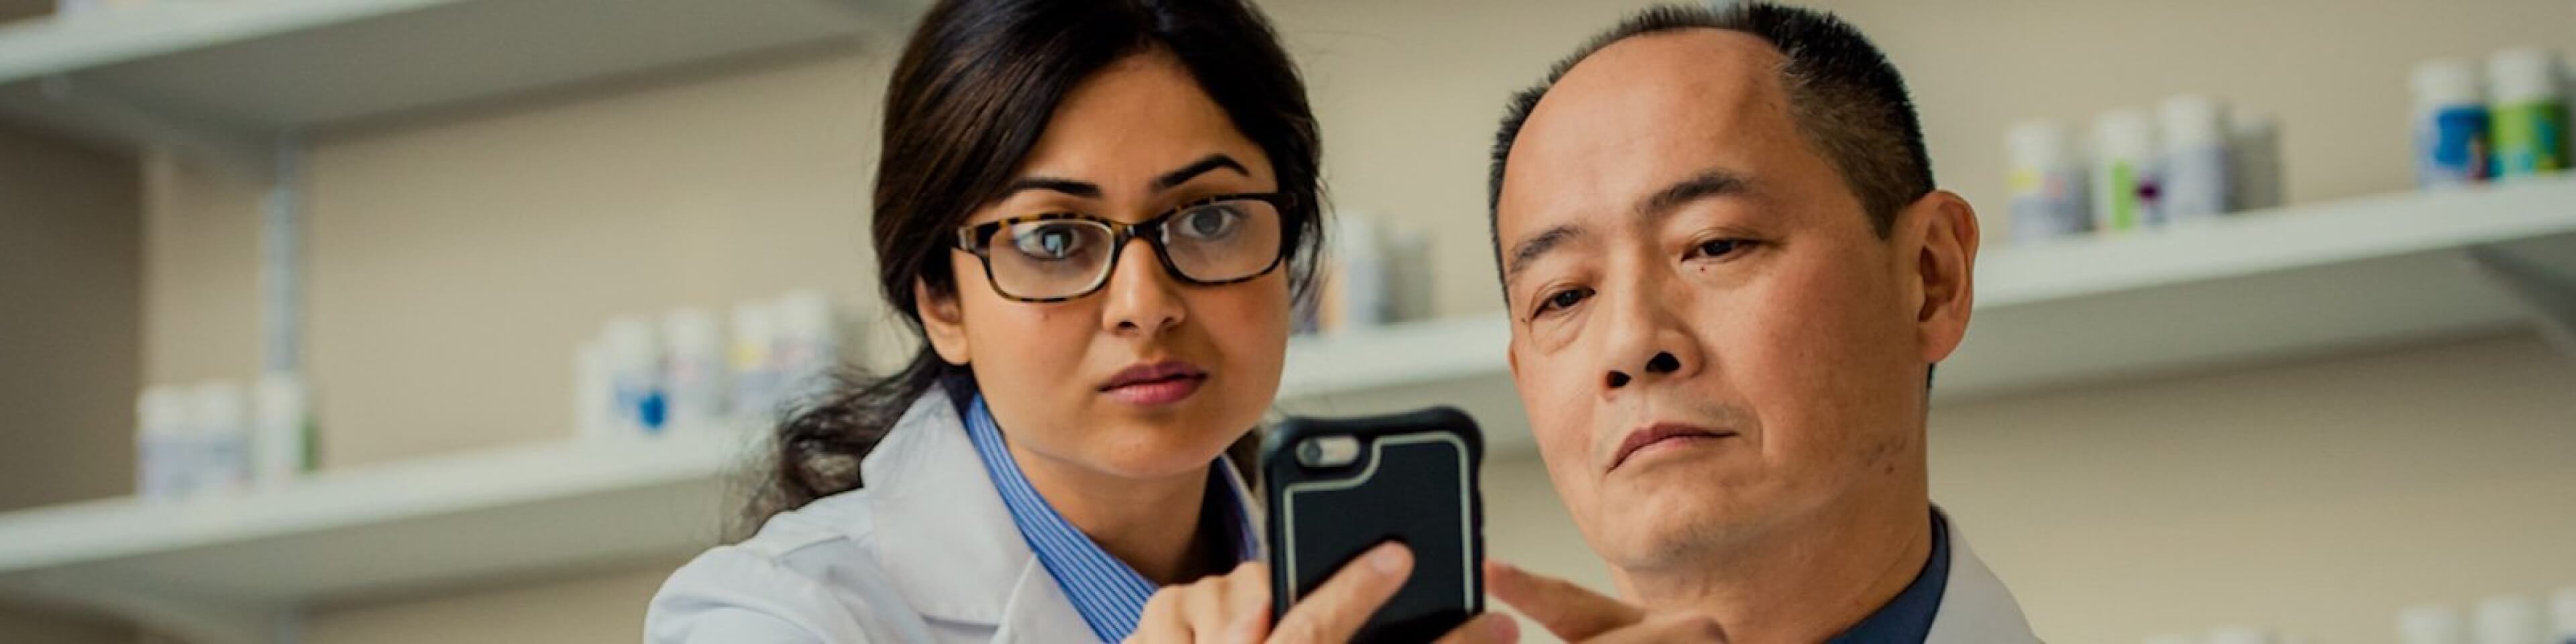 Pharmacists looking at data on a mobile device